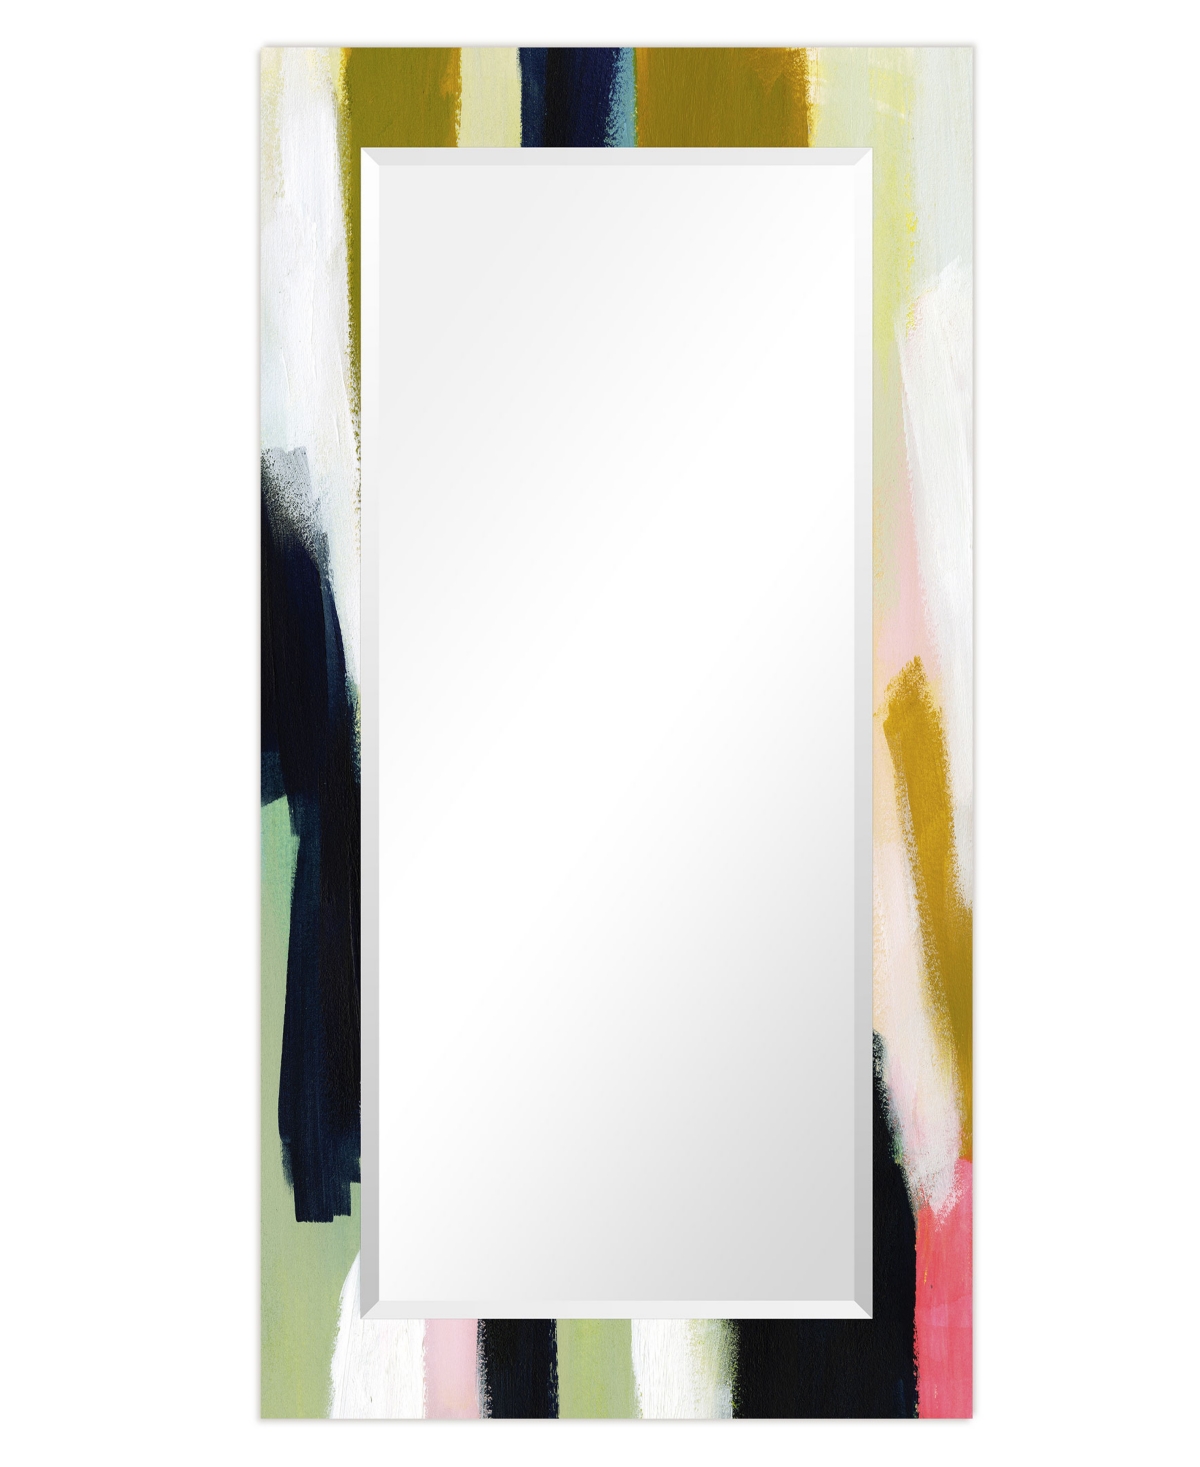 Empire Art Direct "amagansett Ii" Rectangular Beveled Mirror On Free Floating Printed Tempered Art Glass, 54" X 28" X In Multi-color